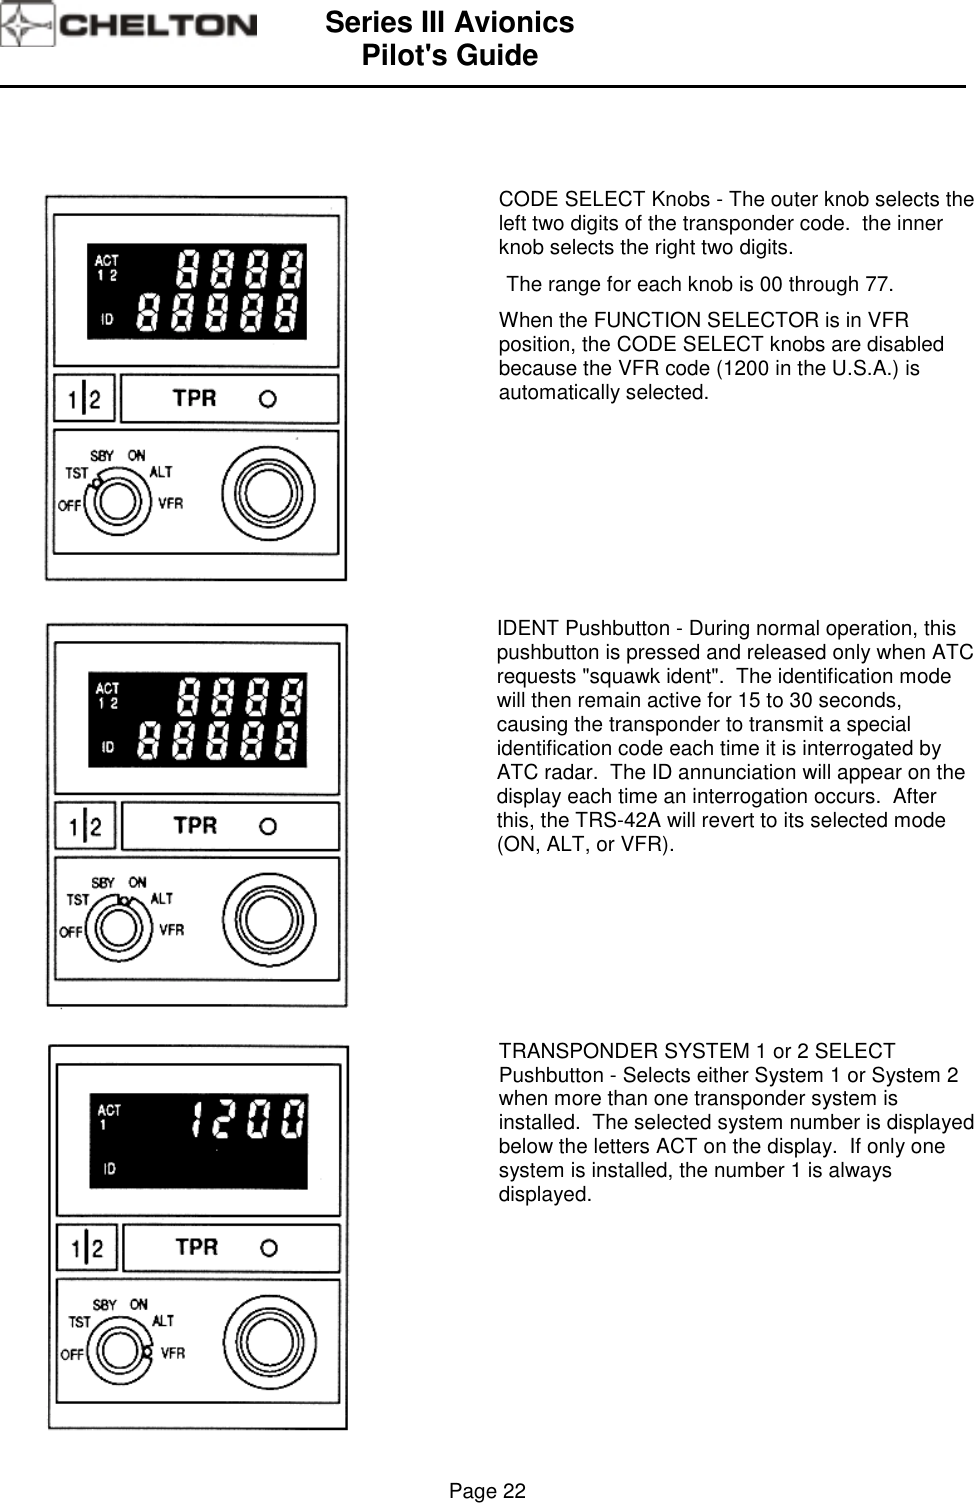 Series III AvionicsPilot&apos;s Guide                                                                                                                                          Page 22CODE SELECT Knobs - The outer knob selects theleft two digits of the transponder code.  the innerknob selects the right two digits.The range for each knob is 00 through 77.When the FUNCTION SELECTOR is in VFRposition, the CODE SELECT knobs are disabledbecause the VFR code (1200 in the U.S.A.) isautomatically selected.IDENT Pushbutton - During normal operation, thispushbutton is pressed and released only when ATCrequests &quot;squawk ident&quot;.  The identification modewill then remain active for 15 to 30 seconds,causing the transponder to transmit a specialidentification code each time it is interrogated byATC radar.  The ID annunciation will appear on thedisplay each time an interrogation occurs.  Afterthis, the TRS-42A will revert to its selected mode(ON, ALT, or VFR).TRANSPONDER SYSTEM 1 or 2 SELECTPushbutton - Selects either System 1 or System 2when more than one transponder system isinstalled.  The selected system number is displayedbelow the letters ACT on the display.  If only onesystem is installed, the number 1 is alwaysdisplayed.